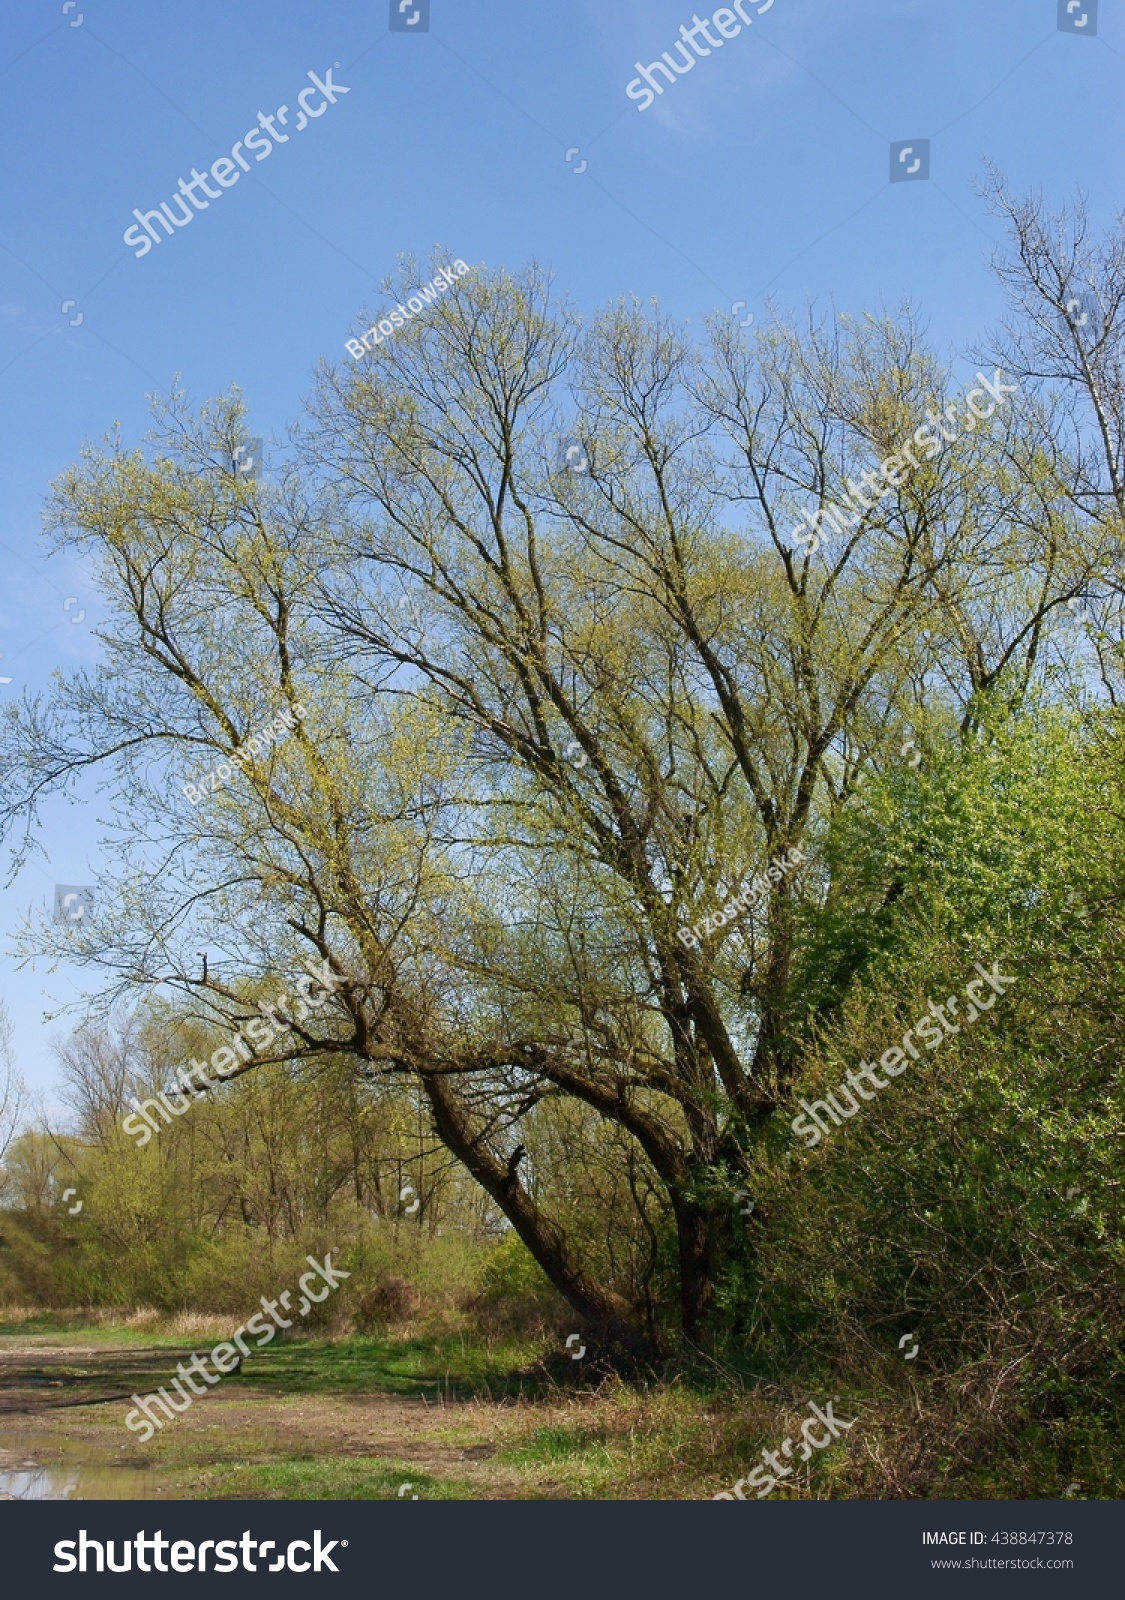 Edit Pictures Free Online - willow tree | Shutterstock Editor